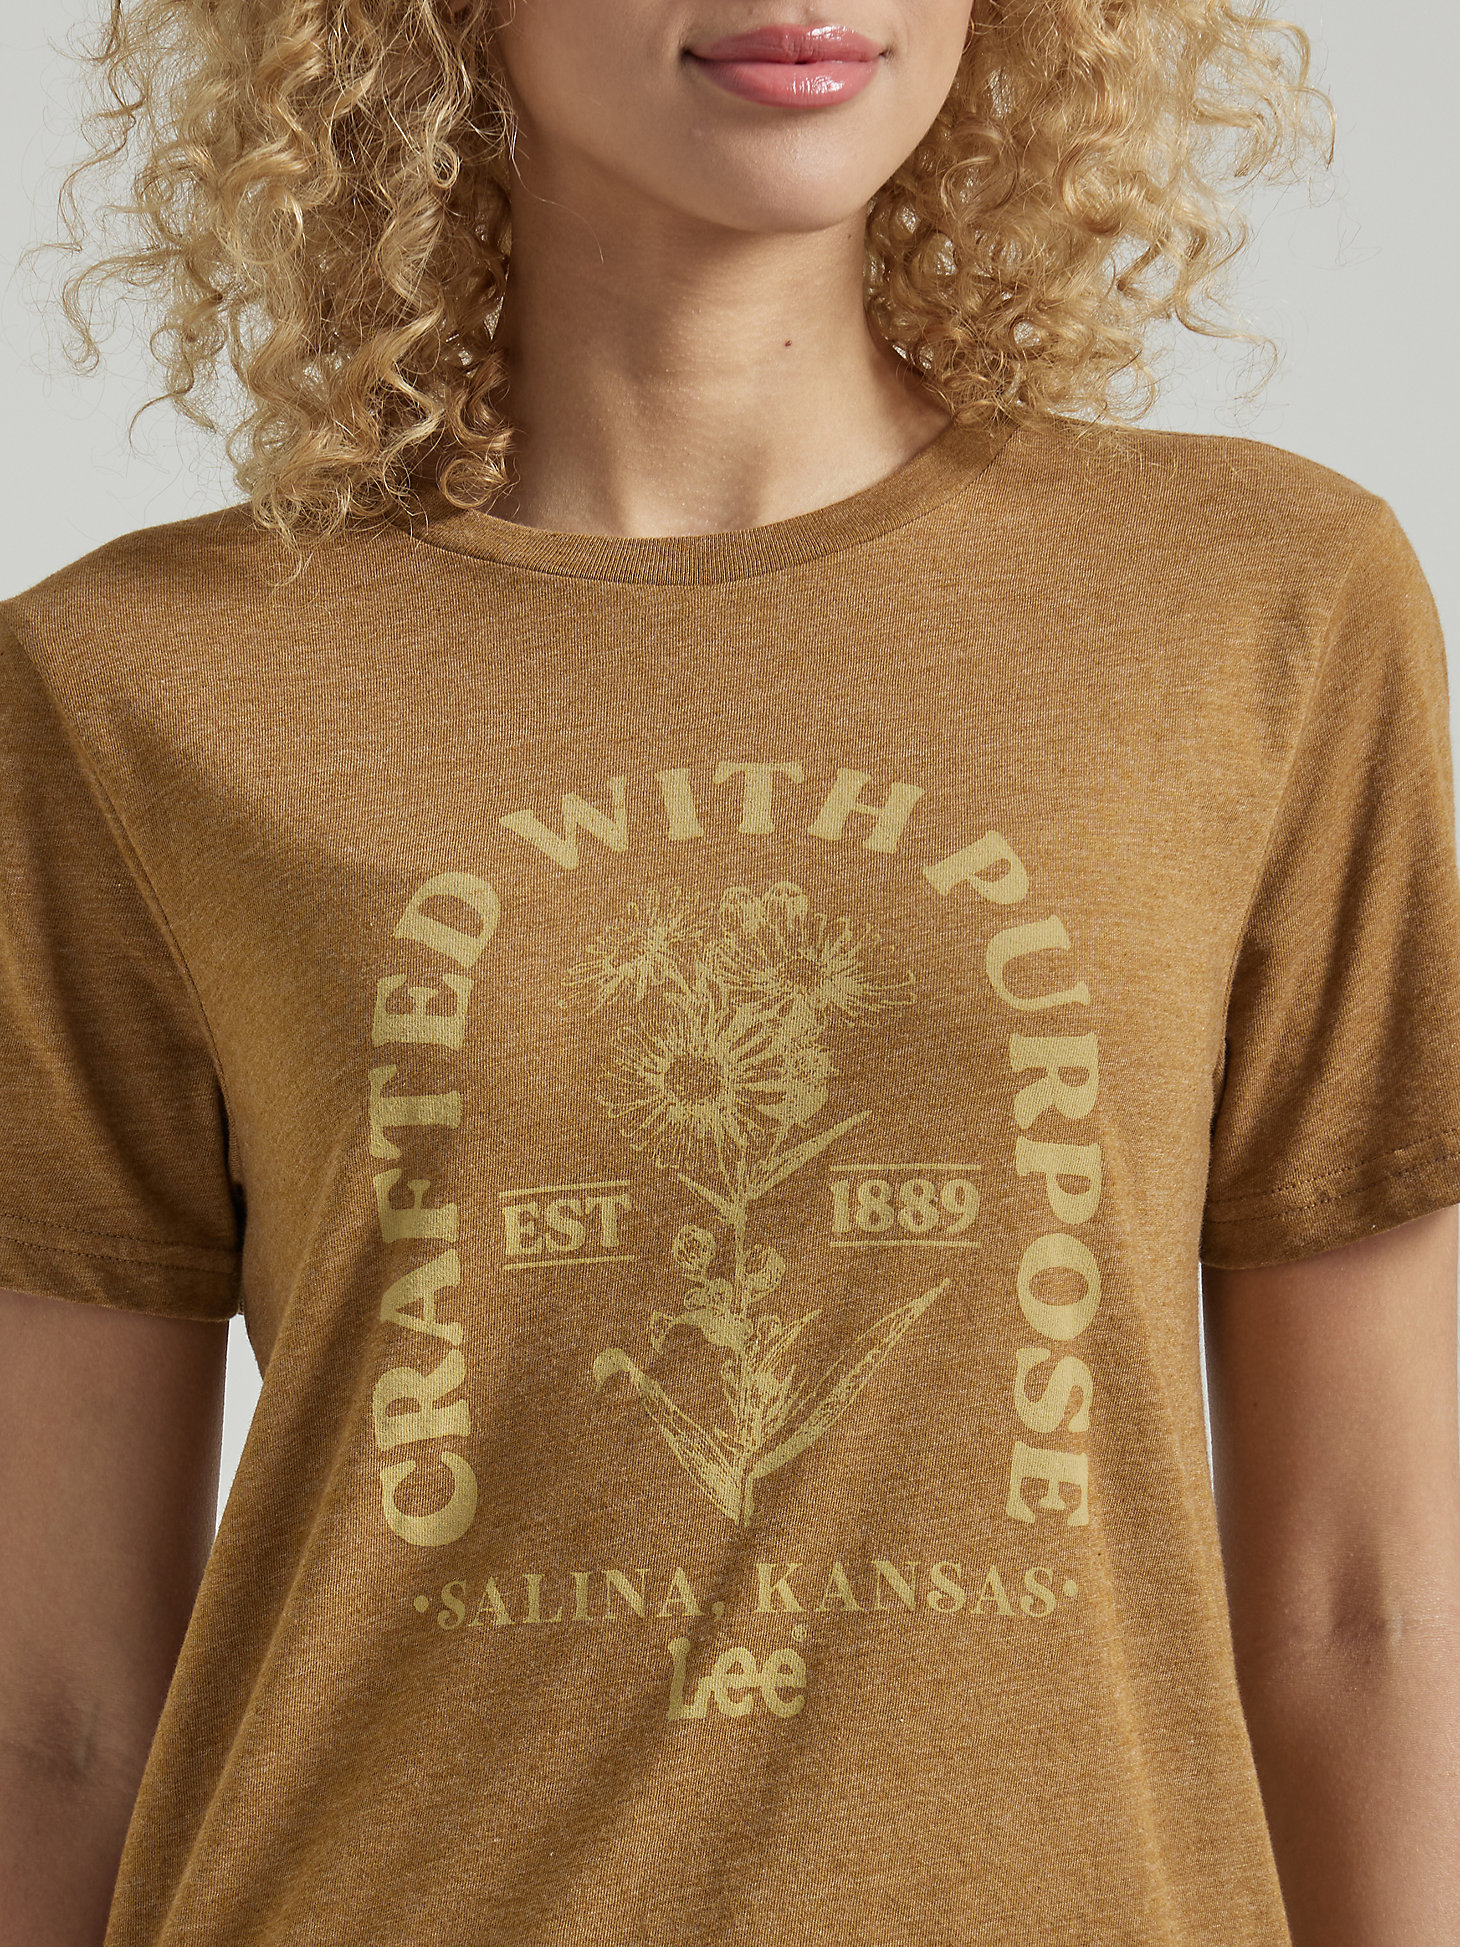 Women's Crafted With Purpose Graphic Tee in Tumbleweed alternative view 2